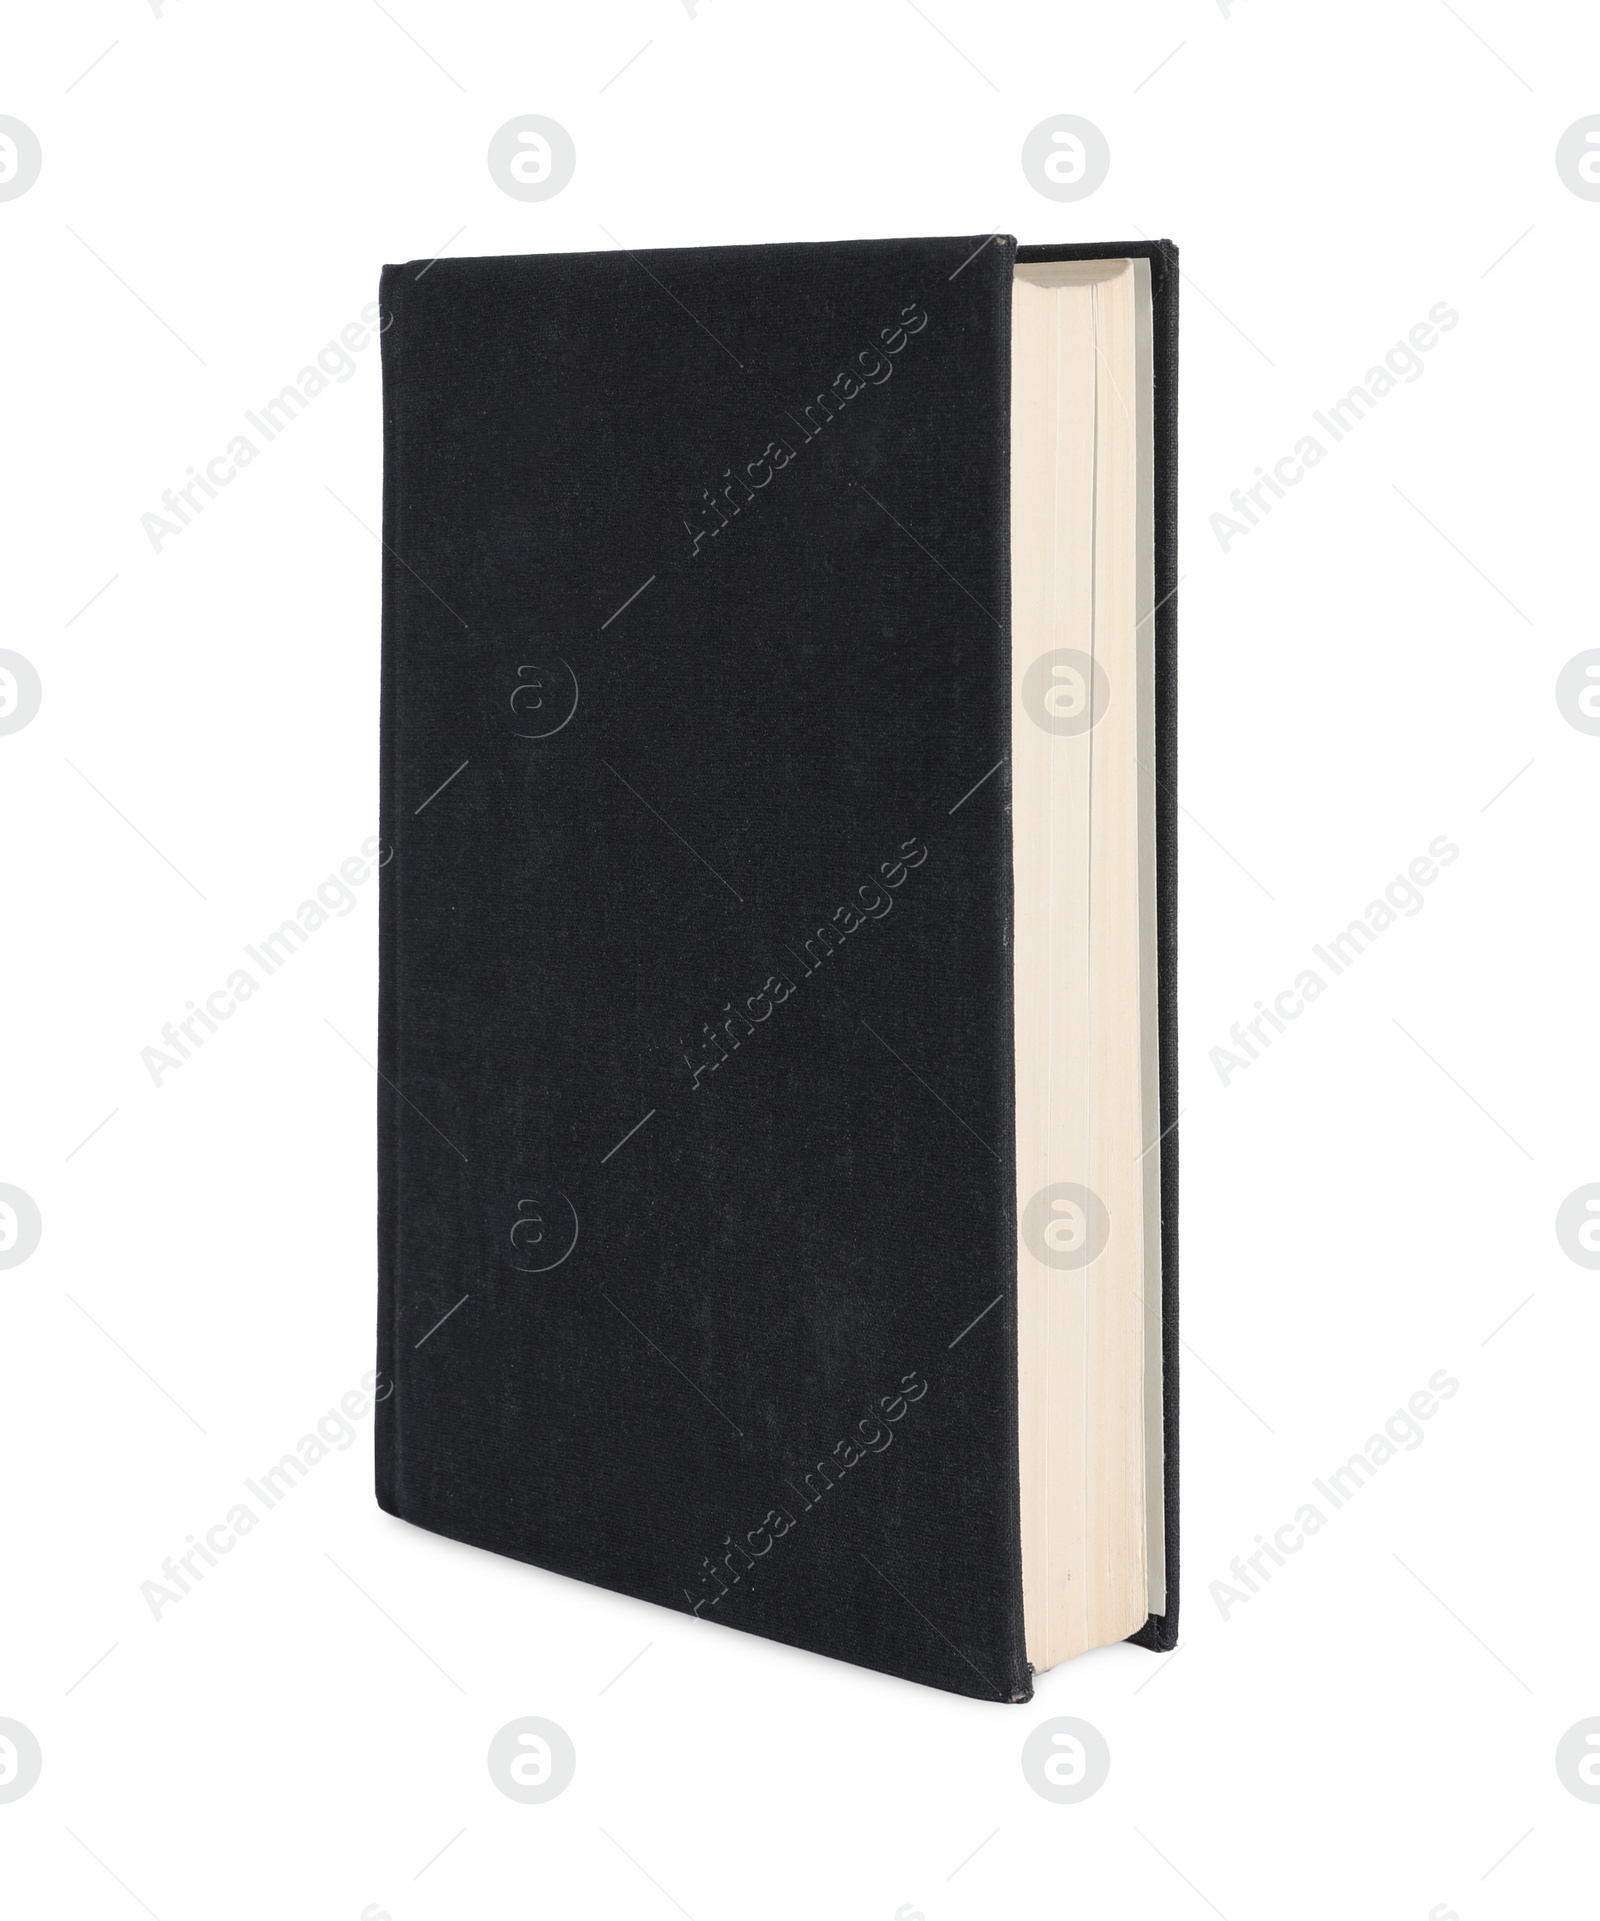 Photo of Closed old hardcover book isolated on white